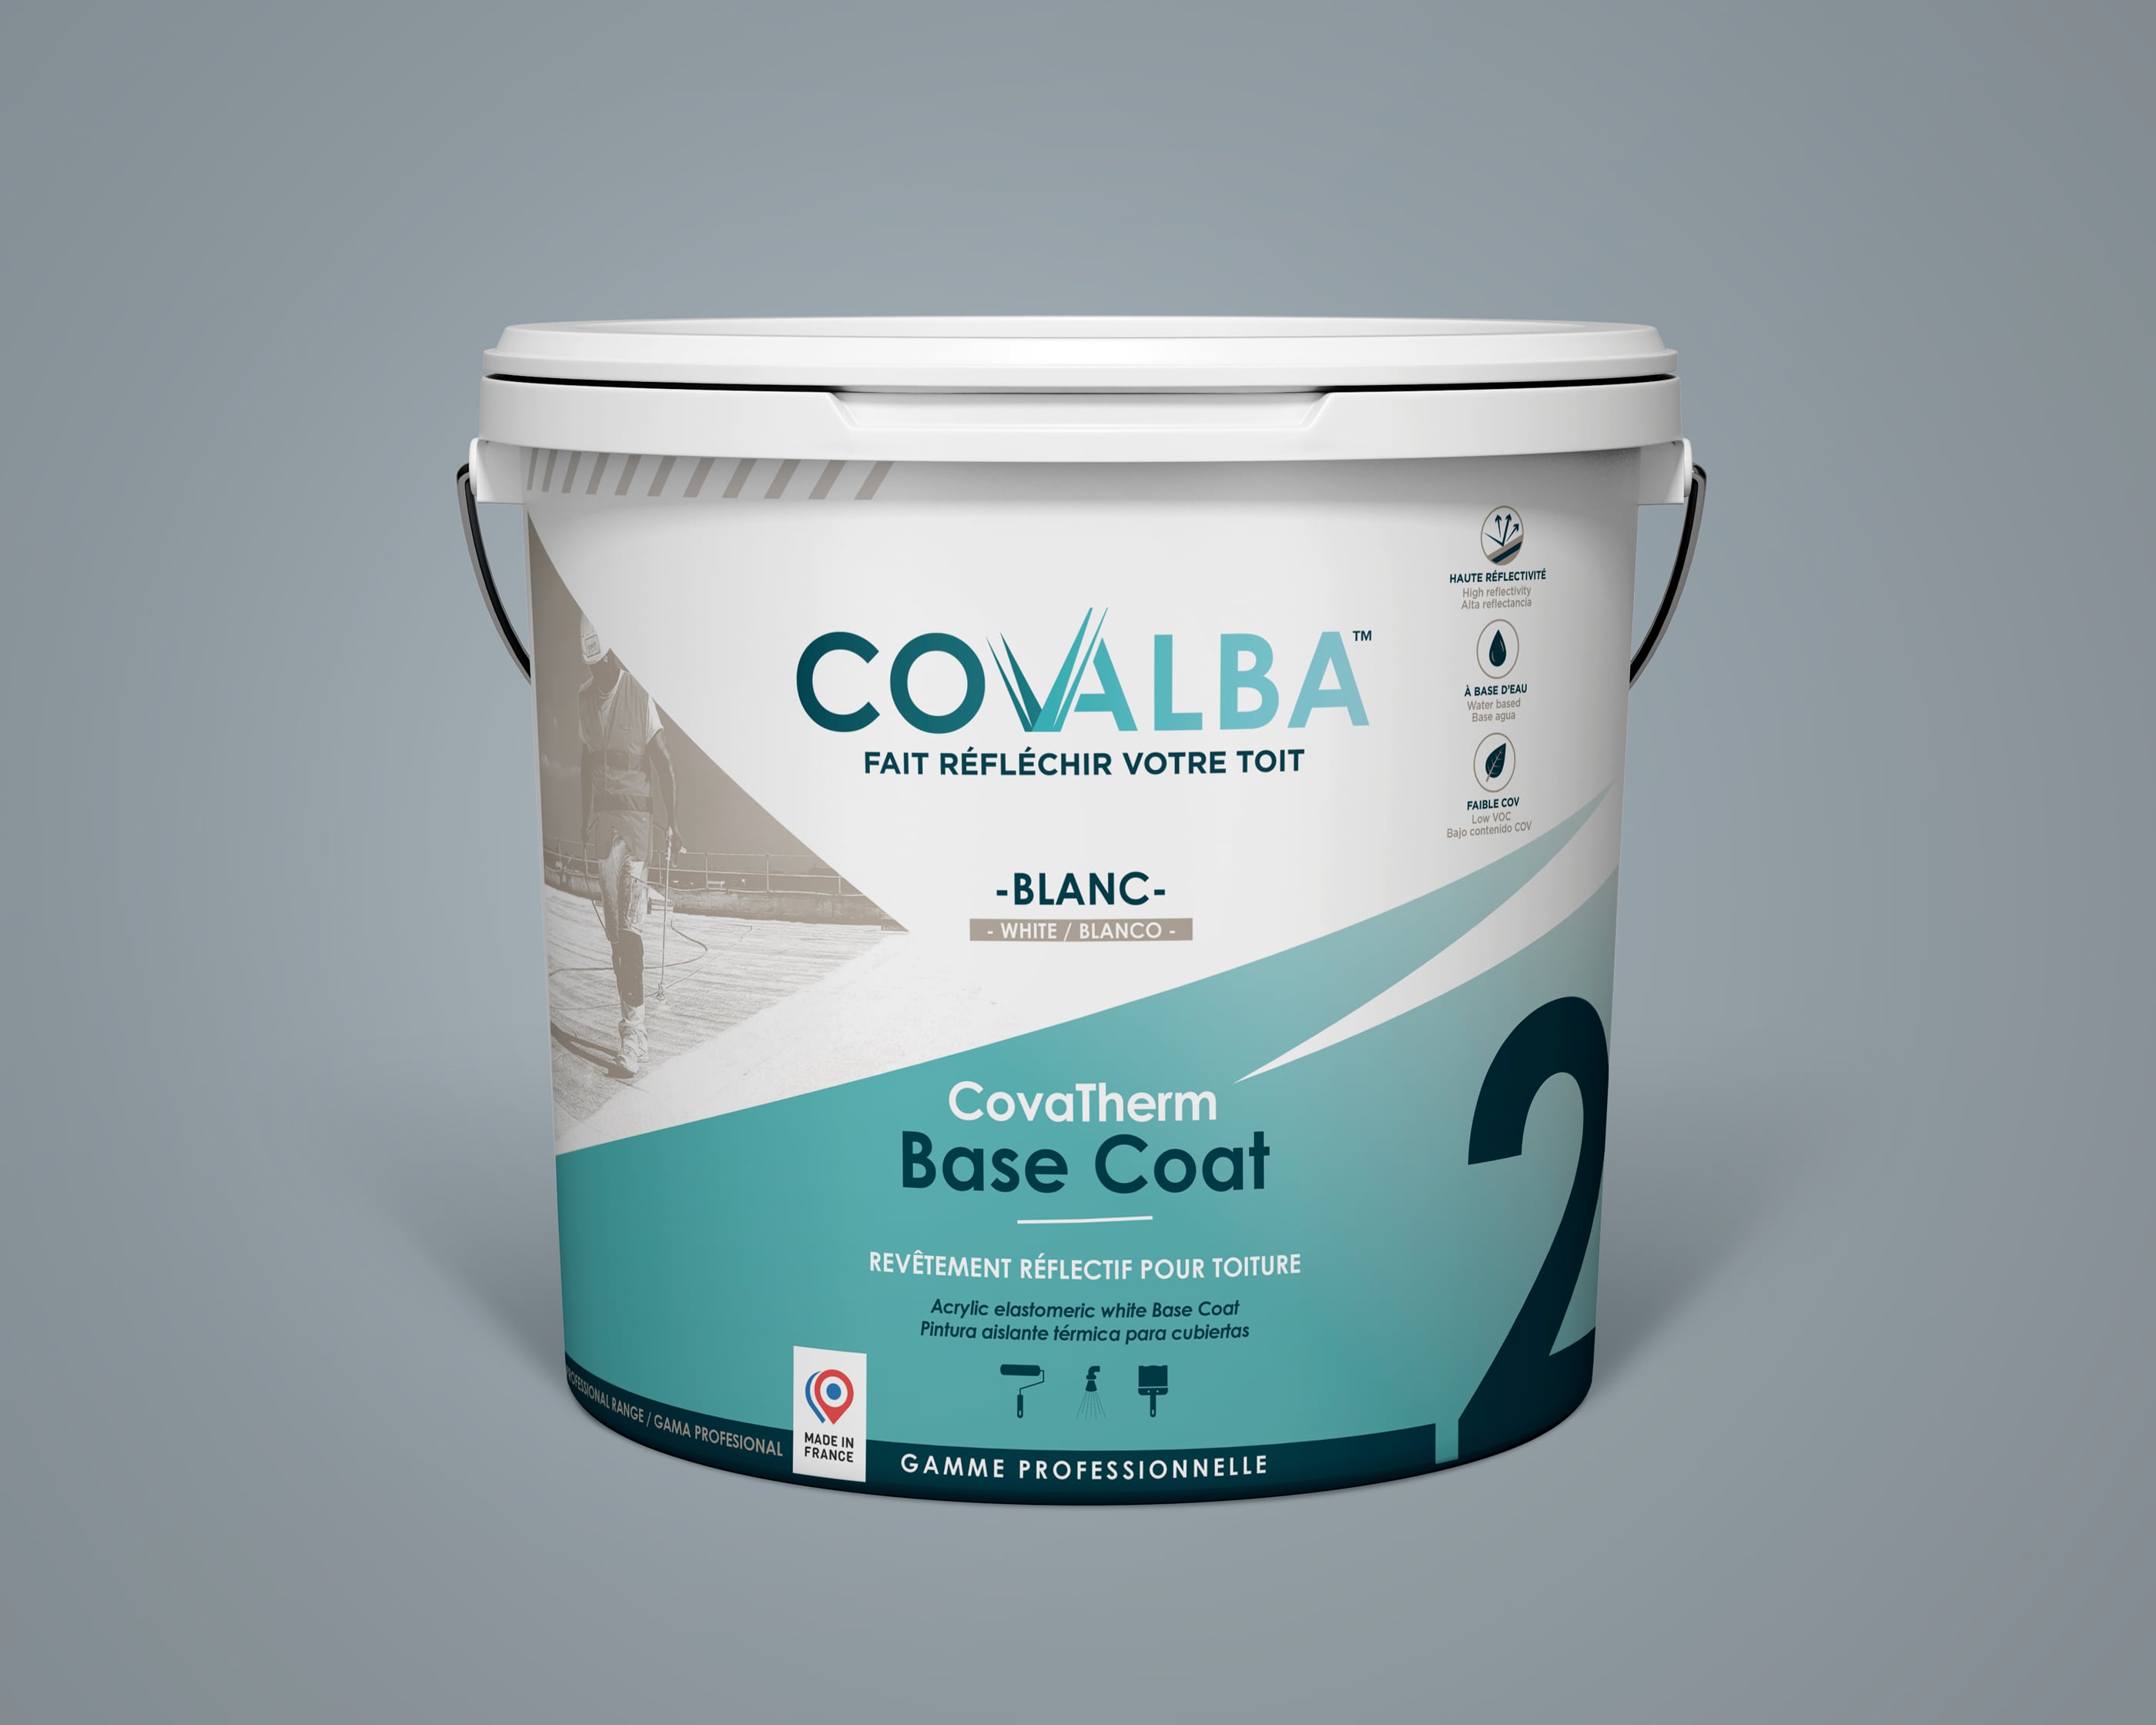 covatherm base coat cool roof covalba